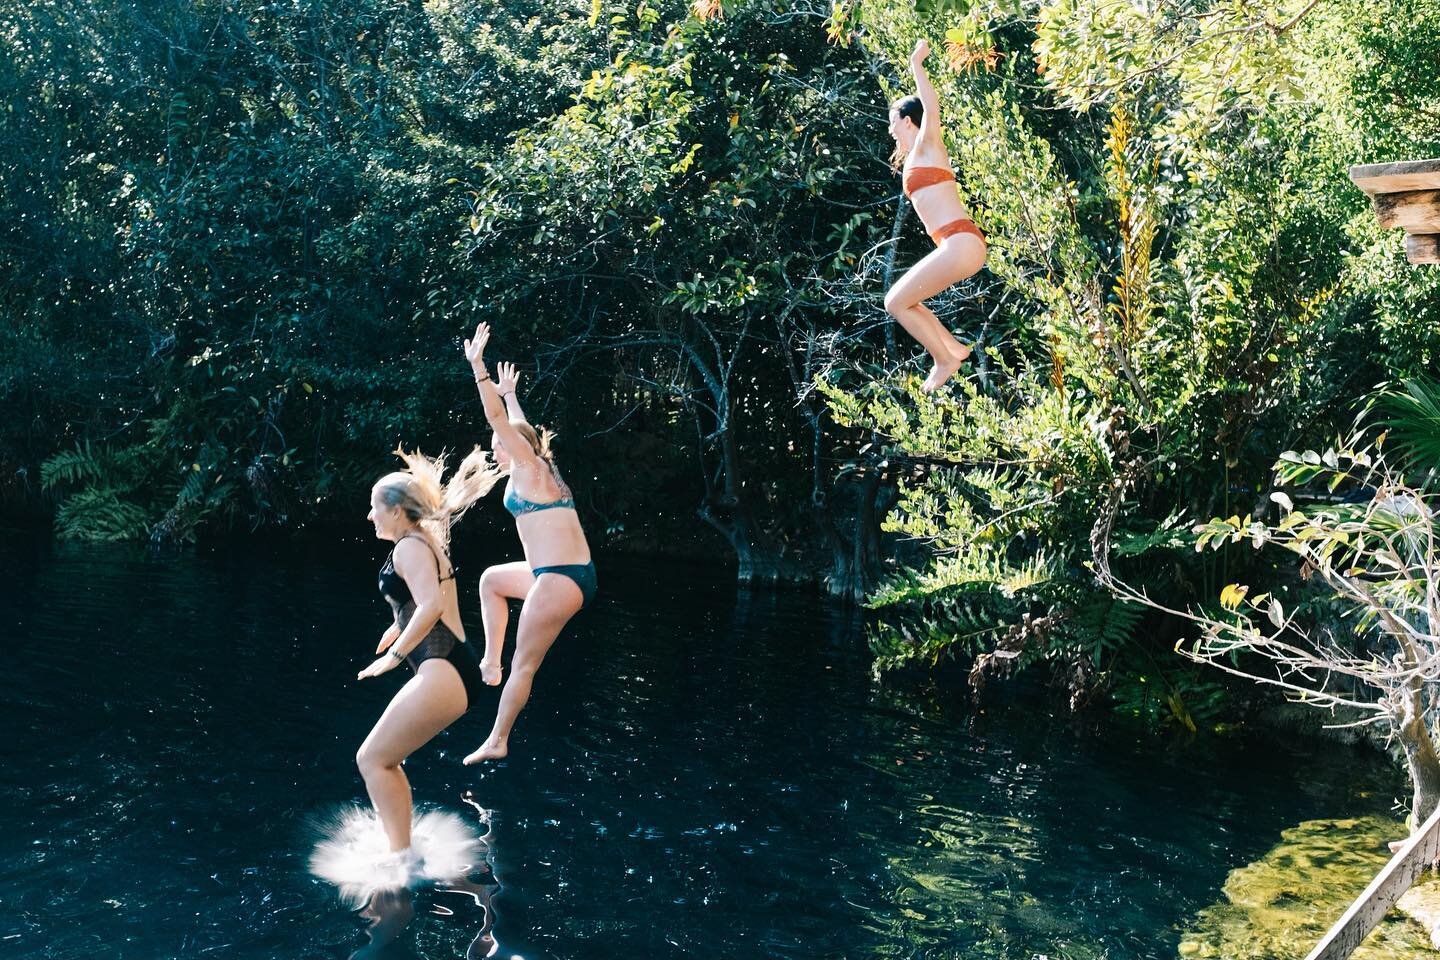 Stay firmly in your path and dare; be wild two hours a day. // Paul Gauguin

&hellip;or, you know, be wild for a long weekend. We can&rsquo;t wait to show you the side of Tulum so often overlooked by the crowds.

{ Tulum 2023 } 
March 2-6

@pulseyoga